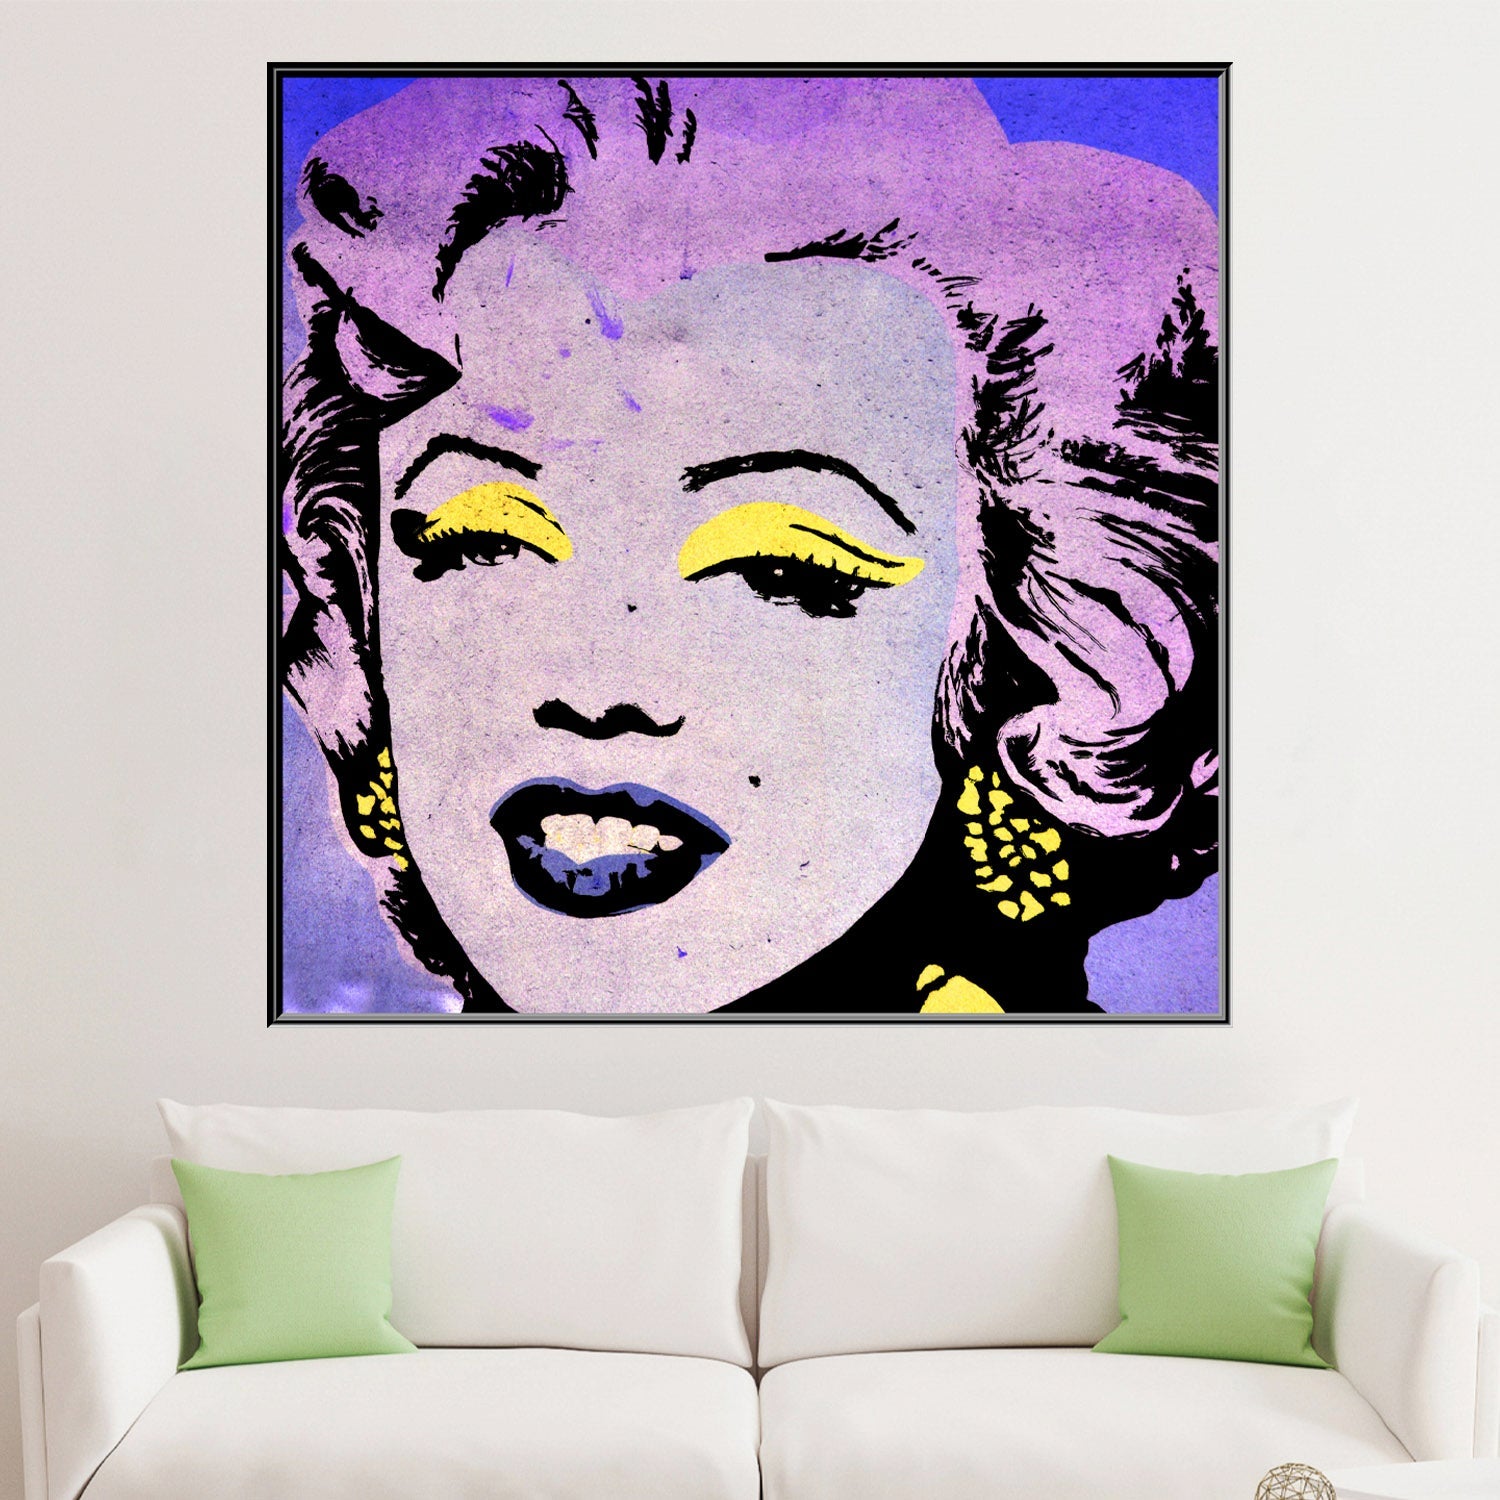 https://cdn.shopify.com/s/files/1/0387/9986/8044/products/ClassicMarilynCanvasArtprintStretched-2.jpg